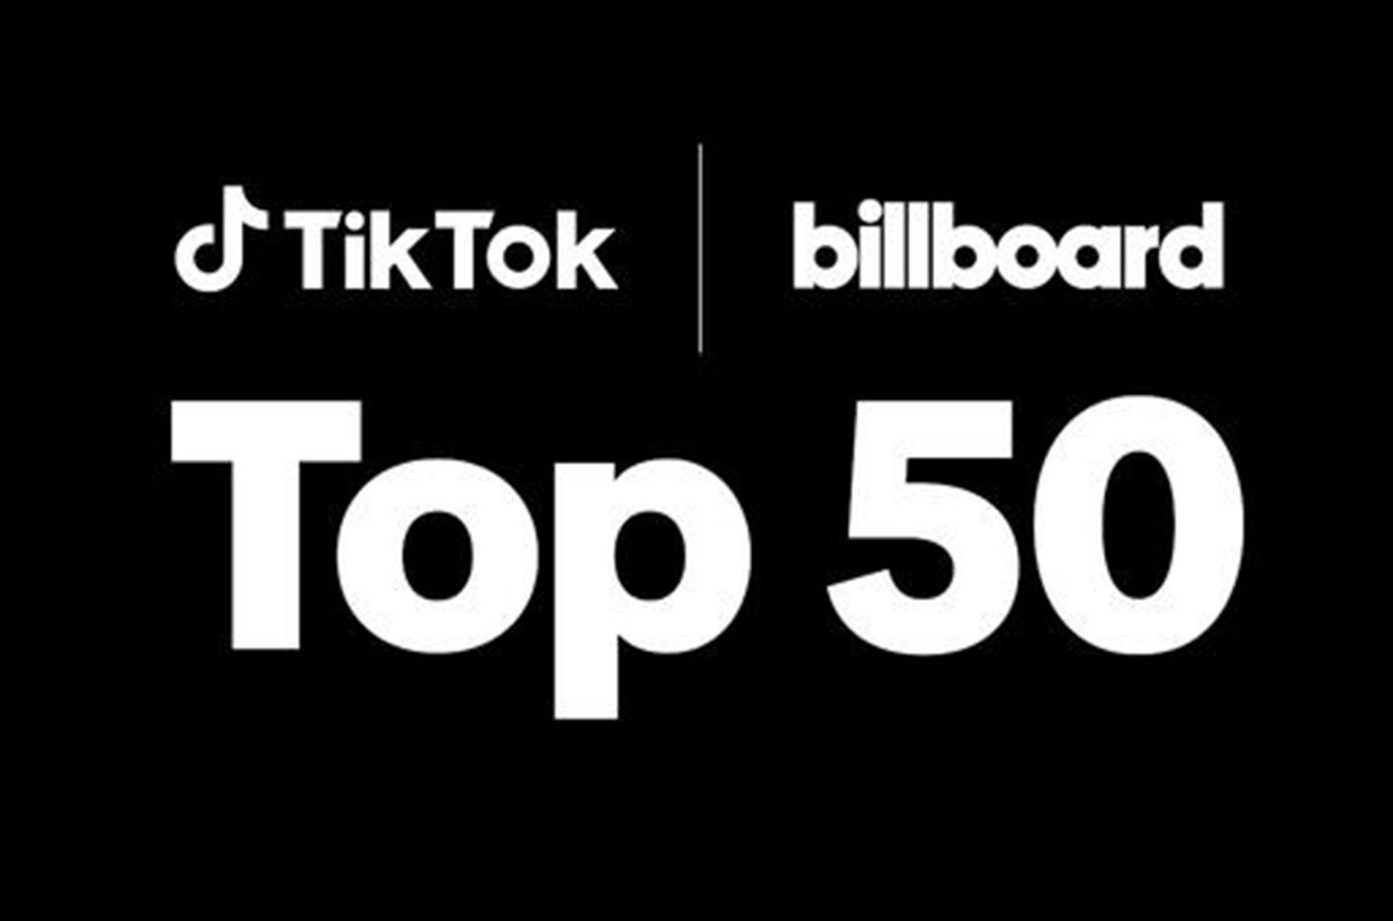 Tik Tok Launches Billboard Top 50 Chart To Track Top Songs In The USA